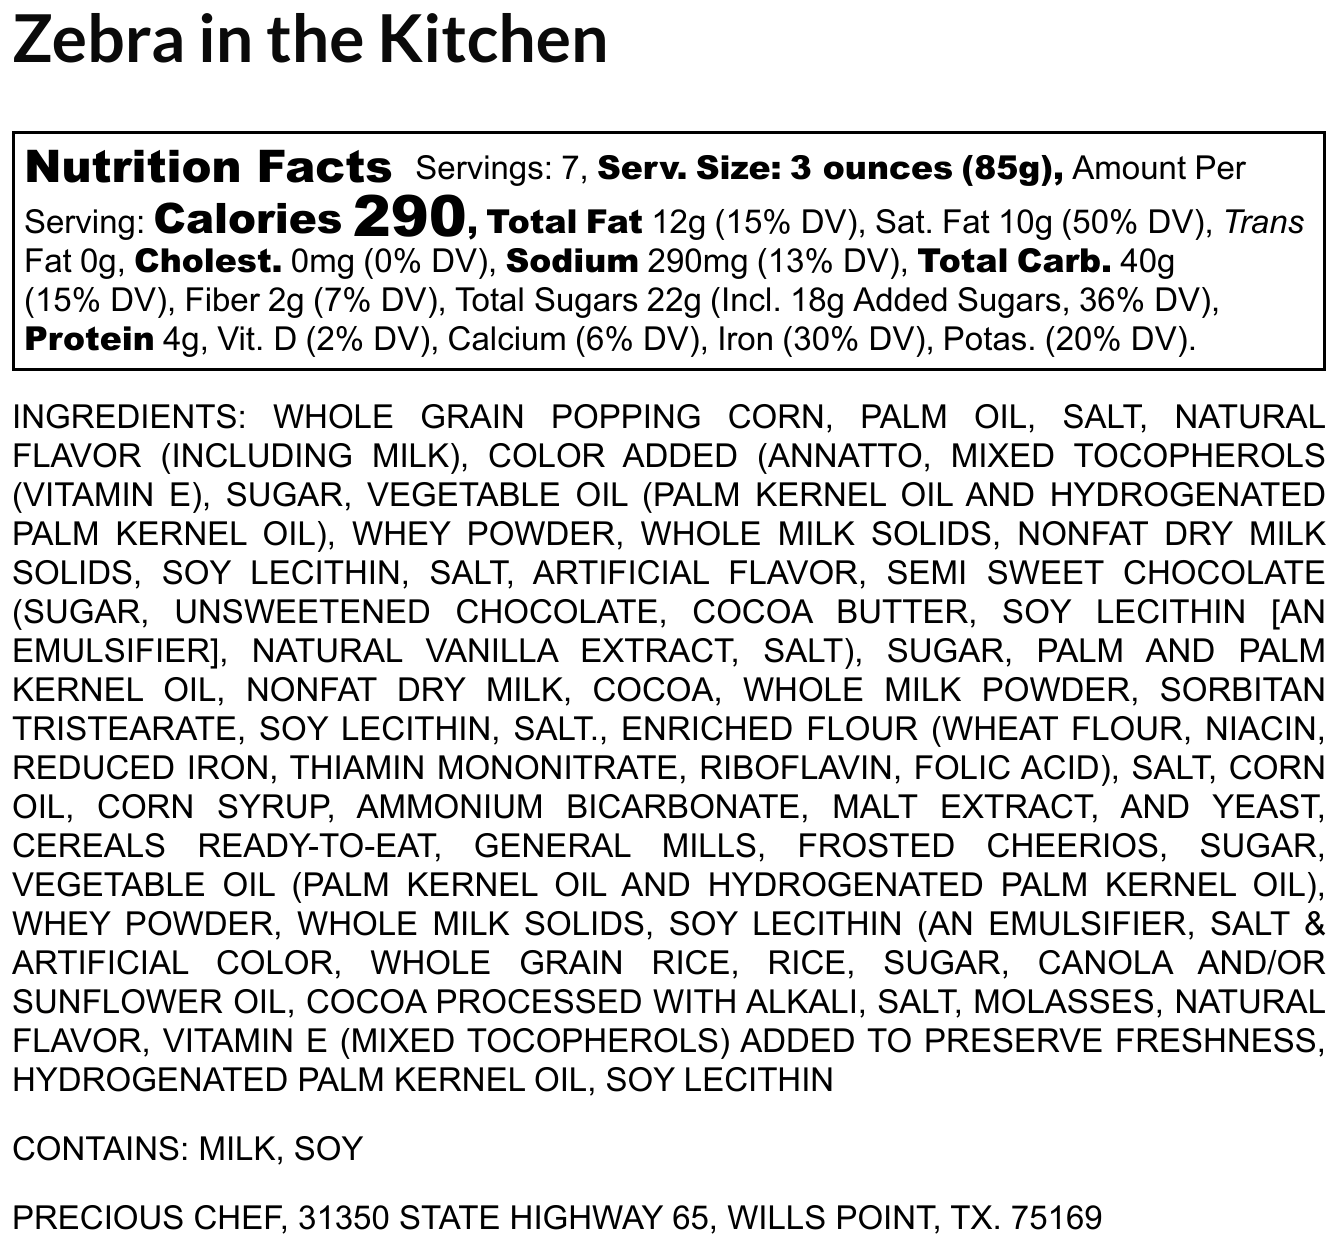 There's A Zebra in the Kitchen Recipe Kit